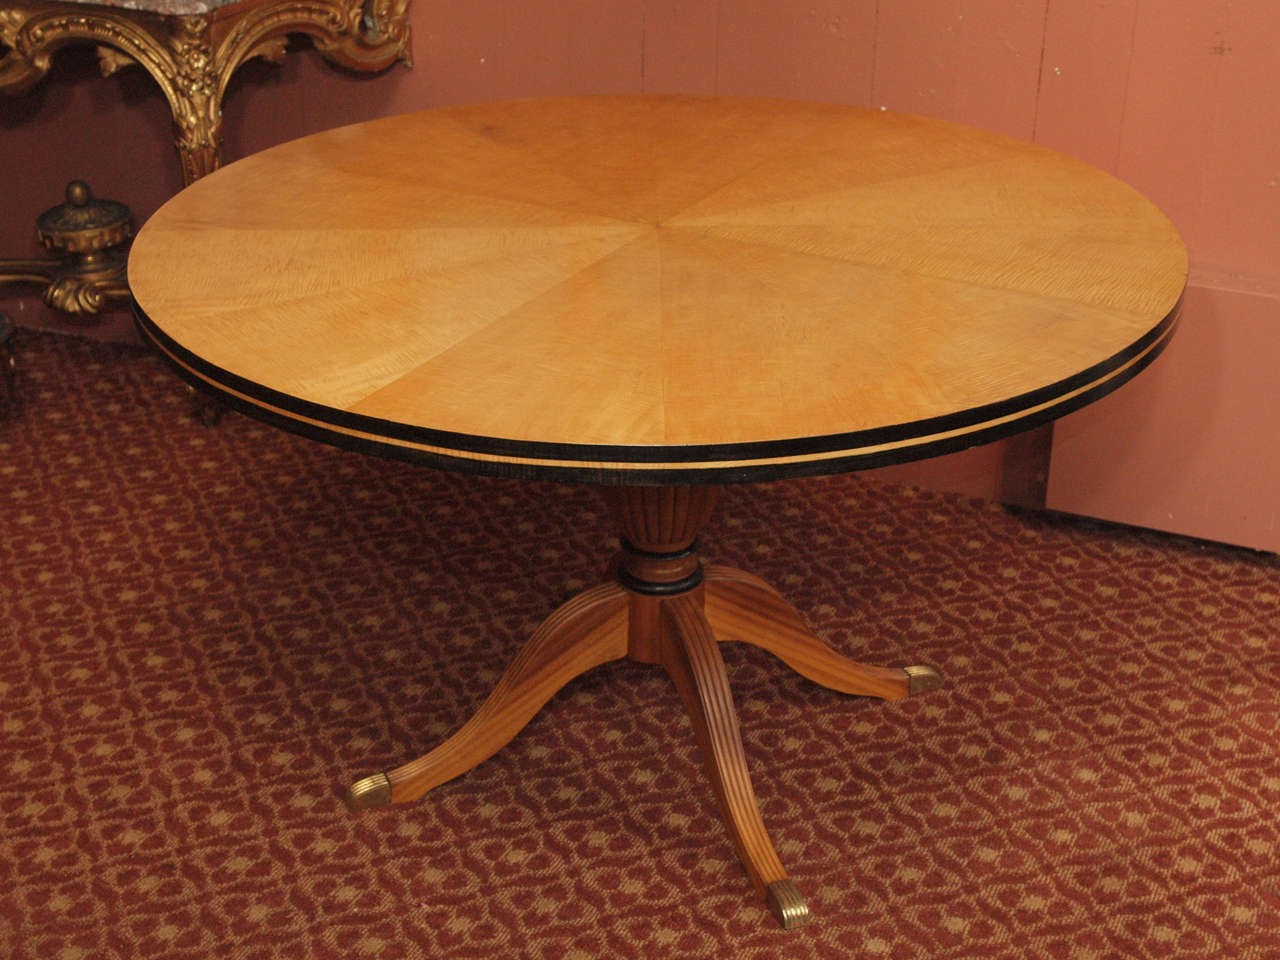 19th century English Regency style sycamore pedestal supper table with carved and ebonized decoration.